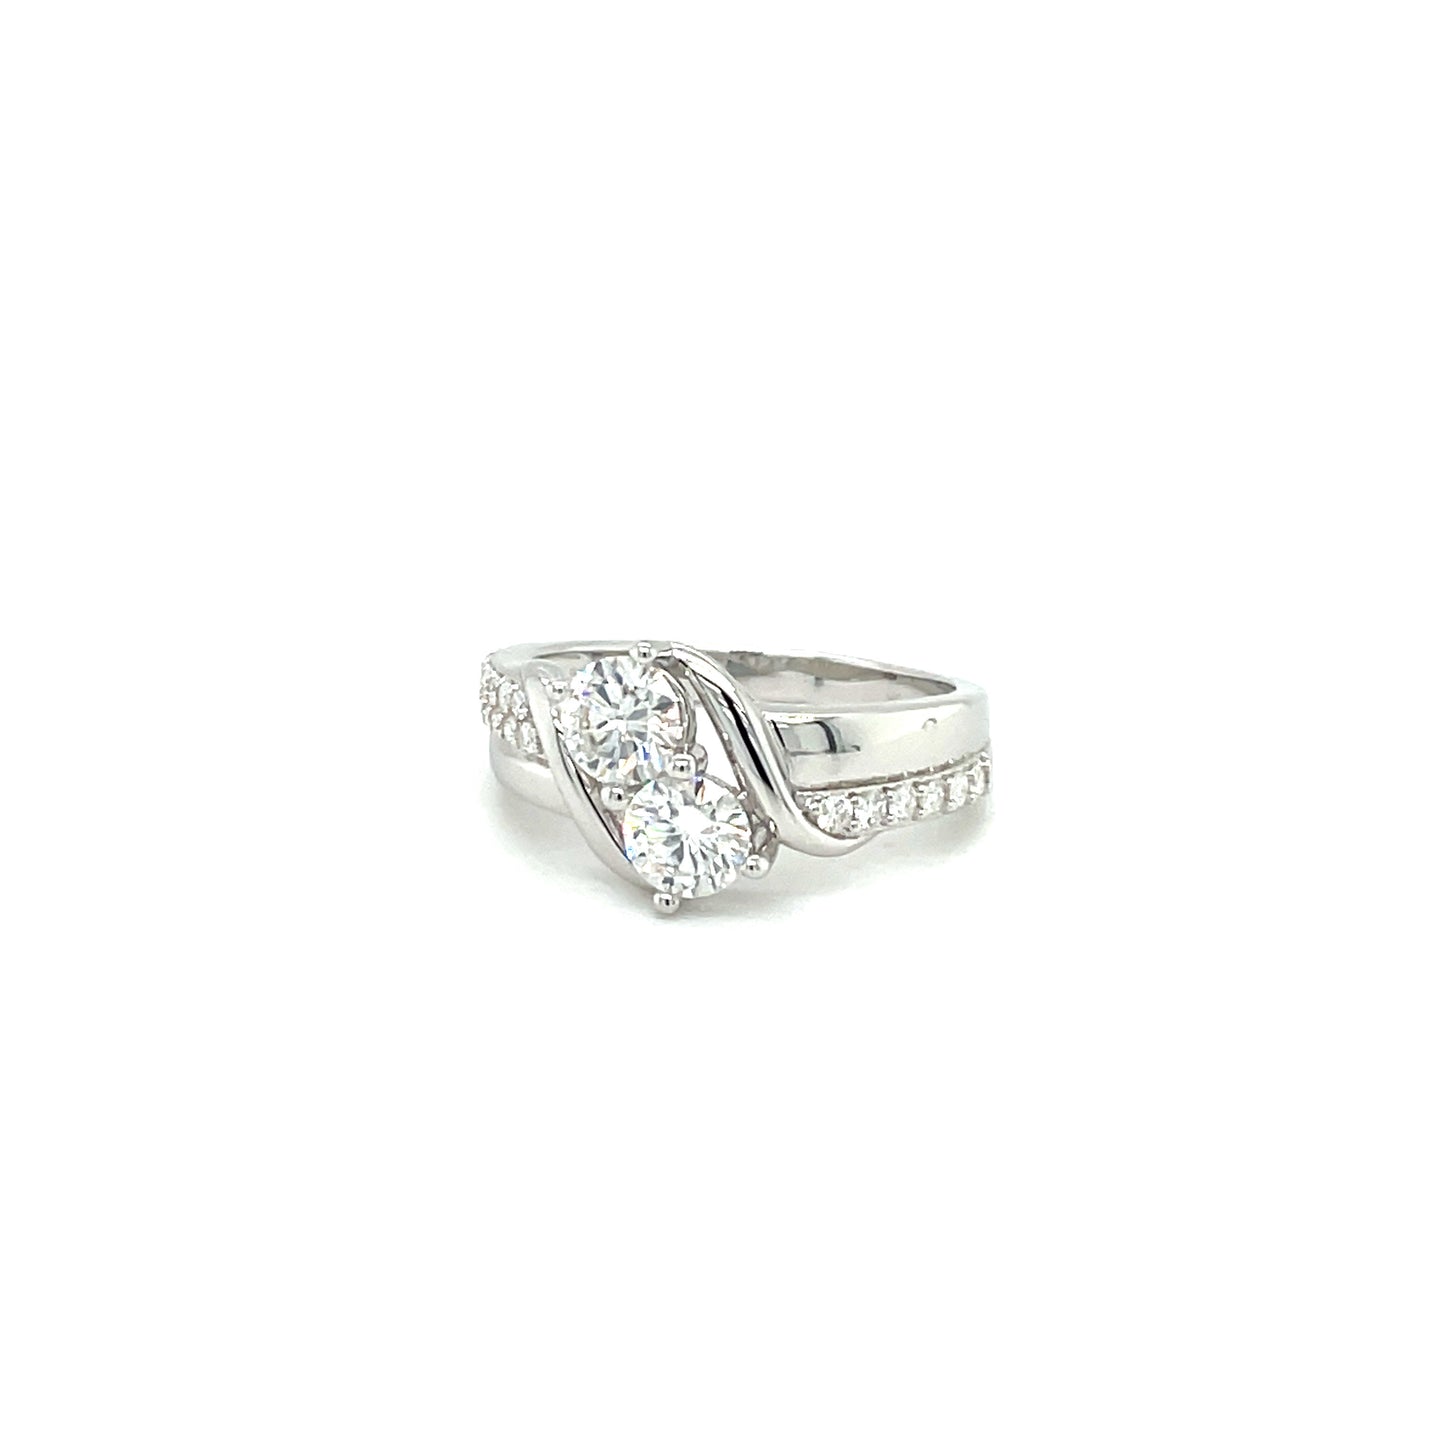 Through Thick & Thin Platinum Plated, Sterling Silver, High Polish  Ring w/2 Round & Moissanite Gemstone Highlights.